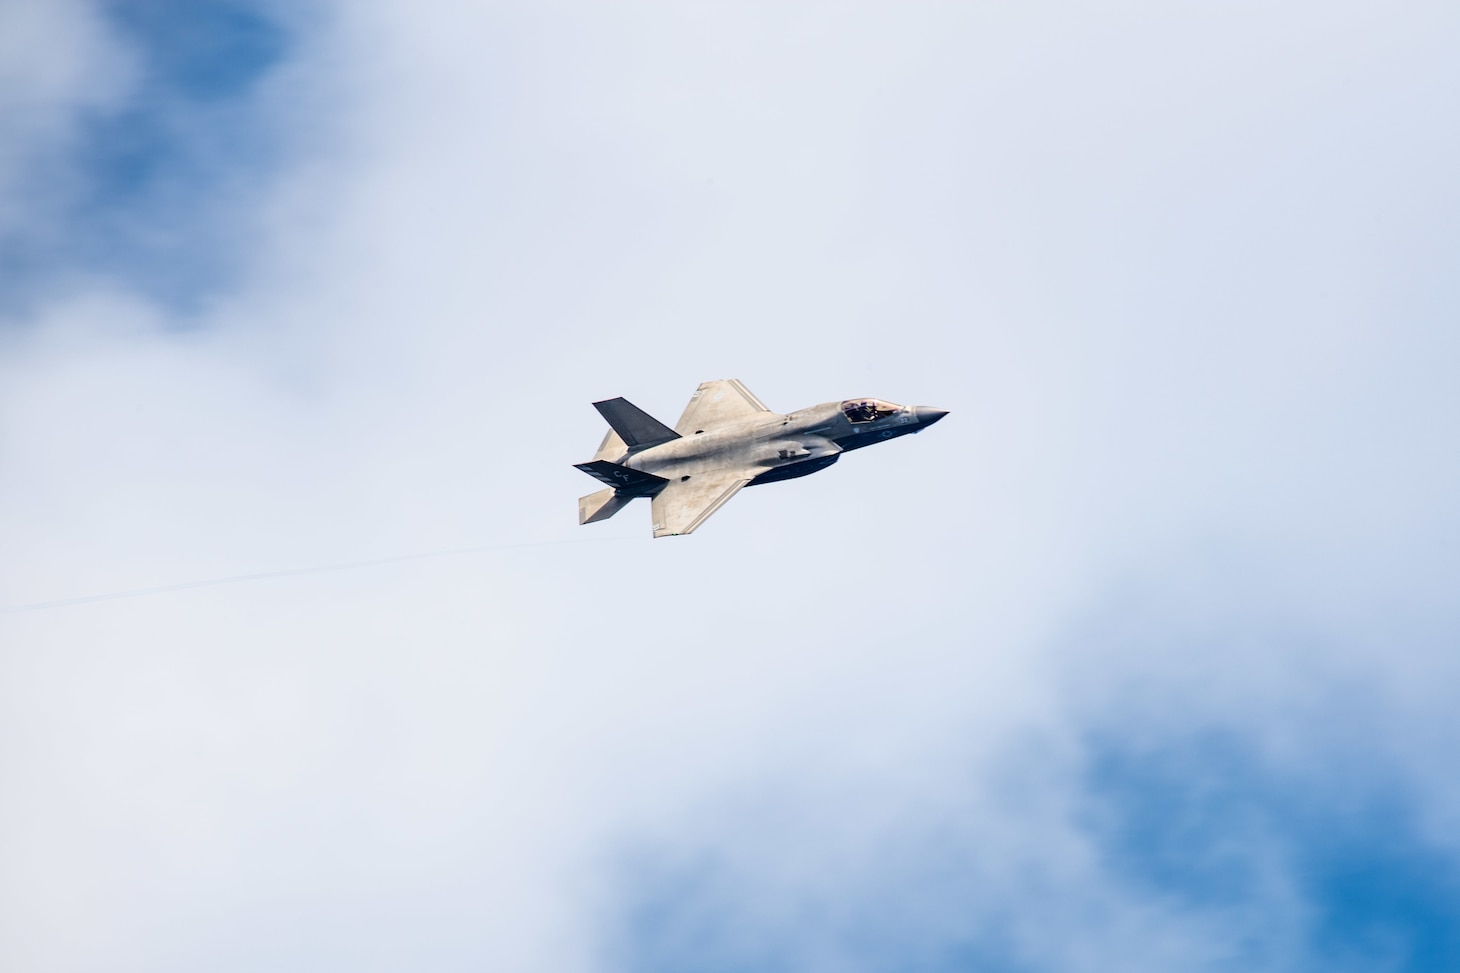 An F-35B Lightning II fighter aircraft from the 31st Marine Expeditionary Unit (MEU), forward-deployed on the amphibious assault ship USS America (LHA 6), performs a “show of force” maneuver during a fire support coordination exercise. America, flagship of the America Expeditionary Strike Group, along with the 31st MEU, is operating in the U.S. 7th Fleet area of responsibility to enhance interoperability with allies and partners and serve as a ready response force to defend peace and stability in the Indo-Pacific region.